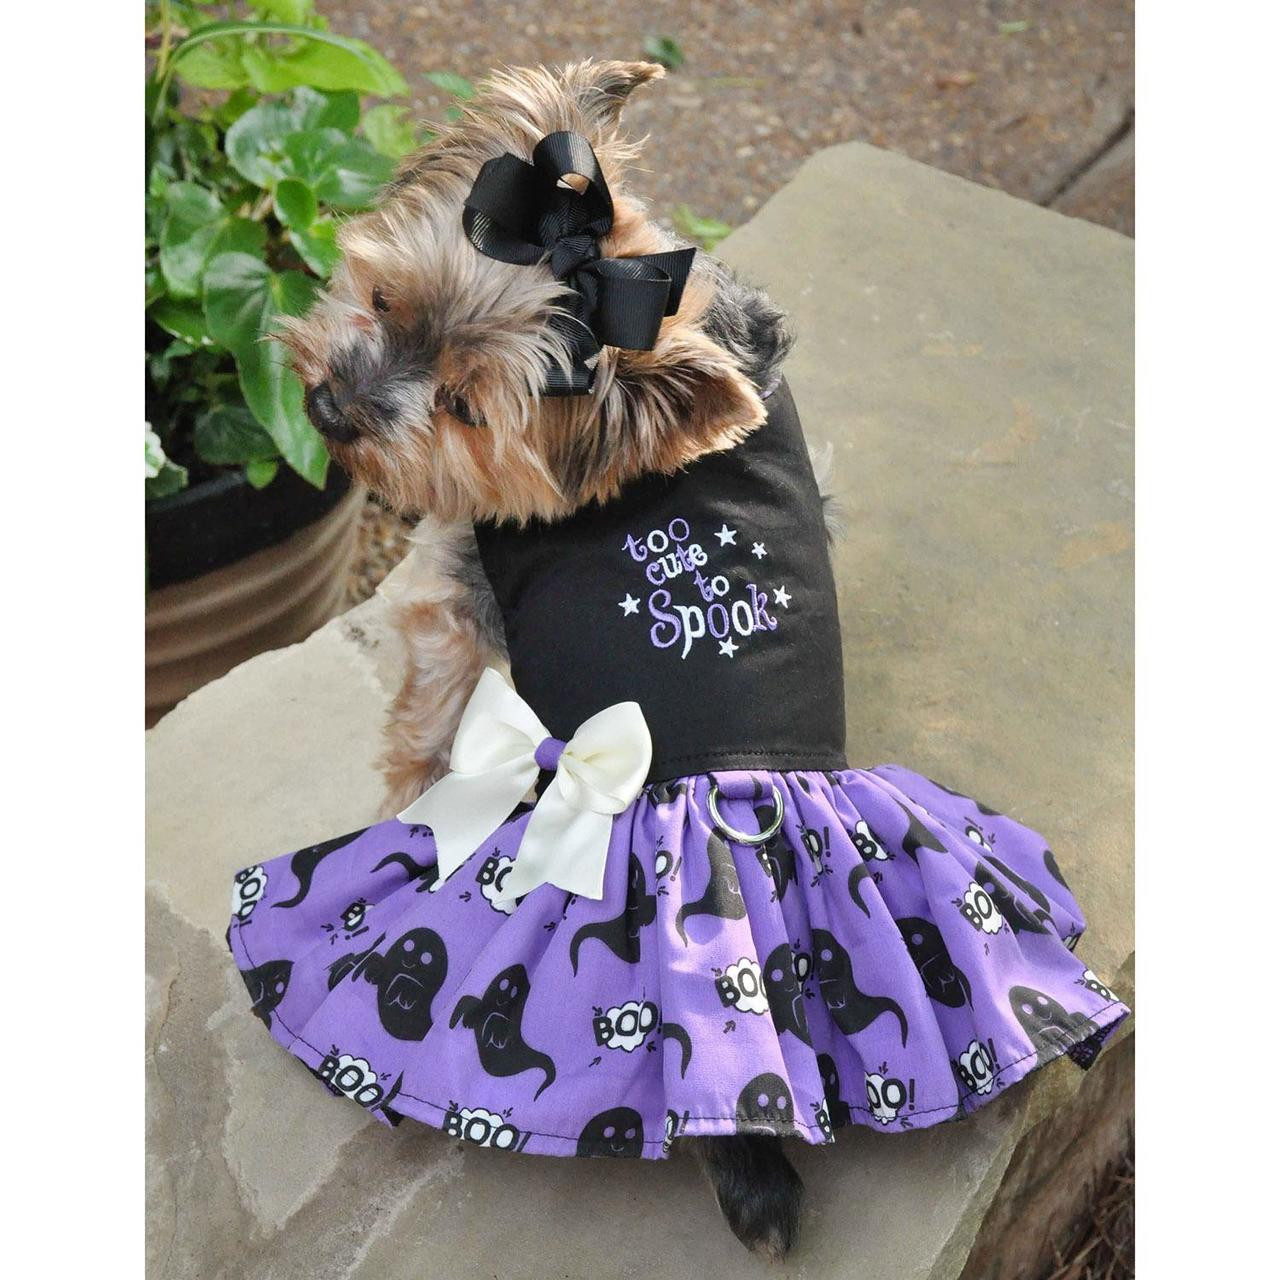 cute halloween dog pictures